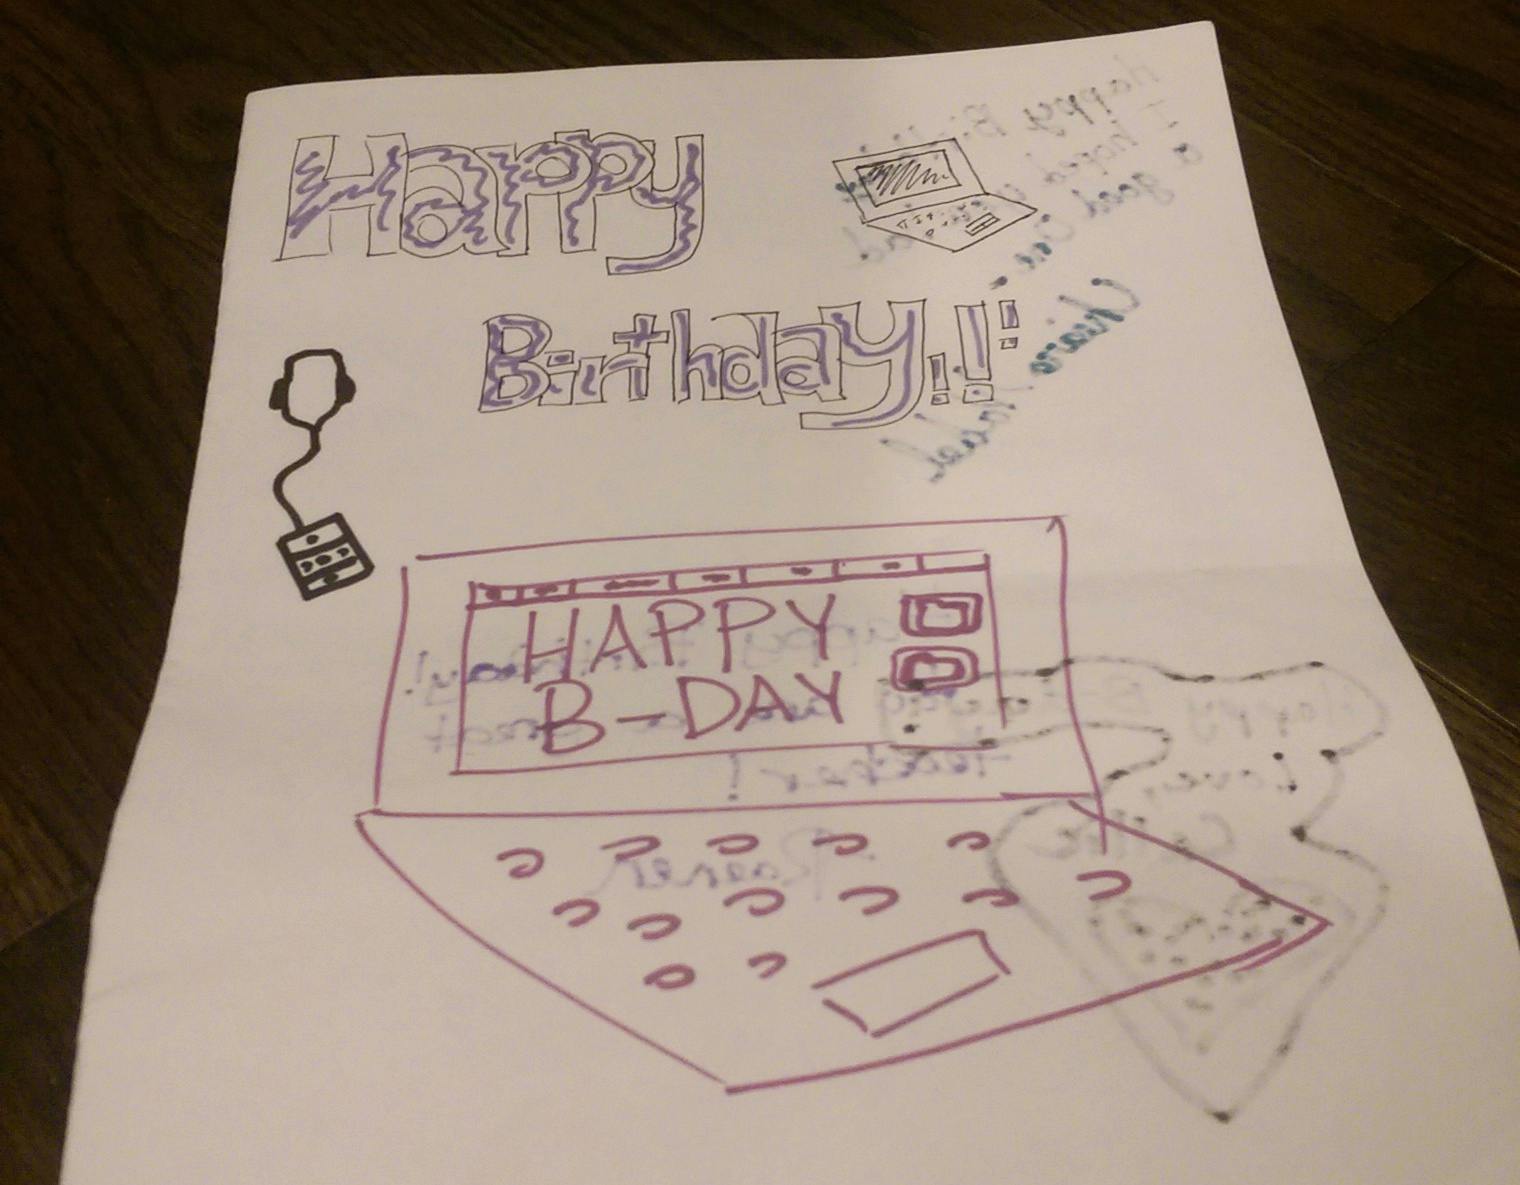 A computer-themed birthday card the GWC crew made for me